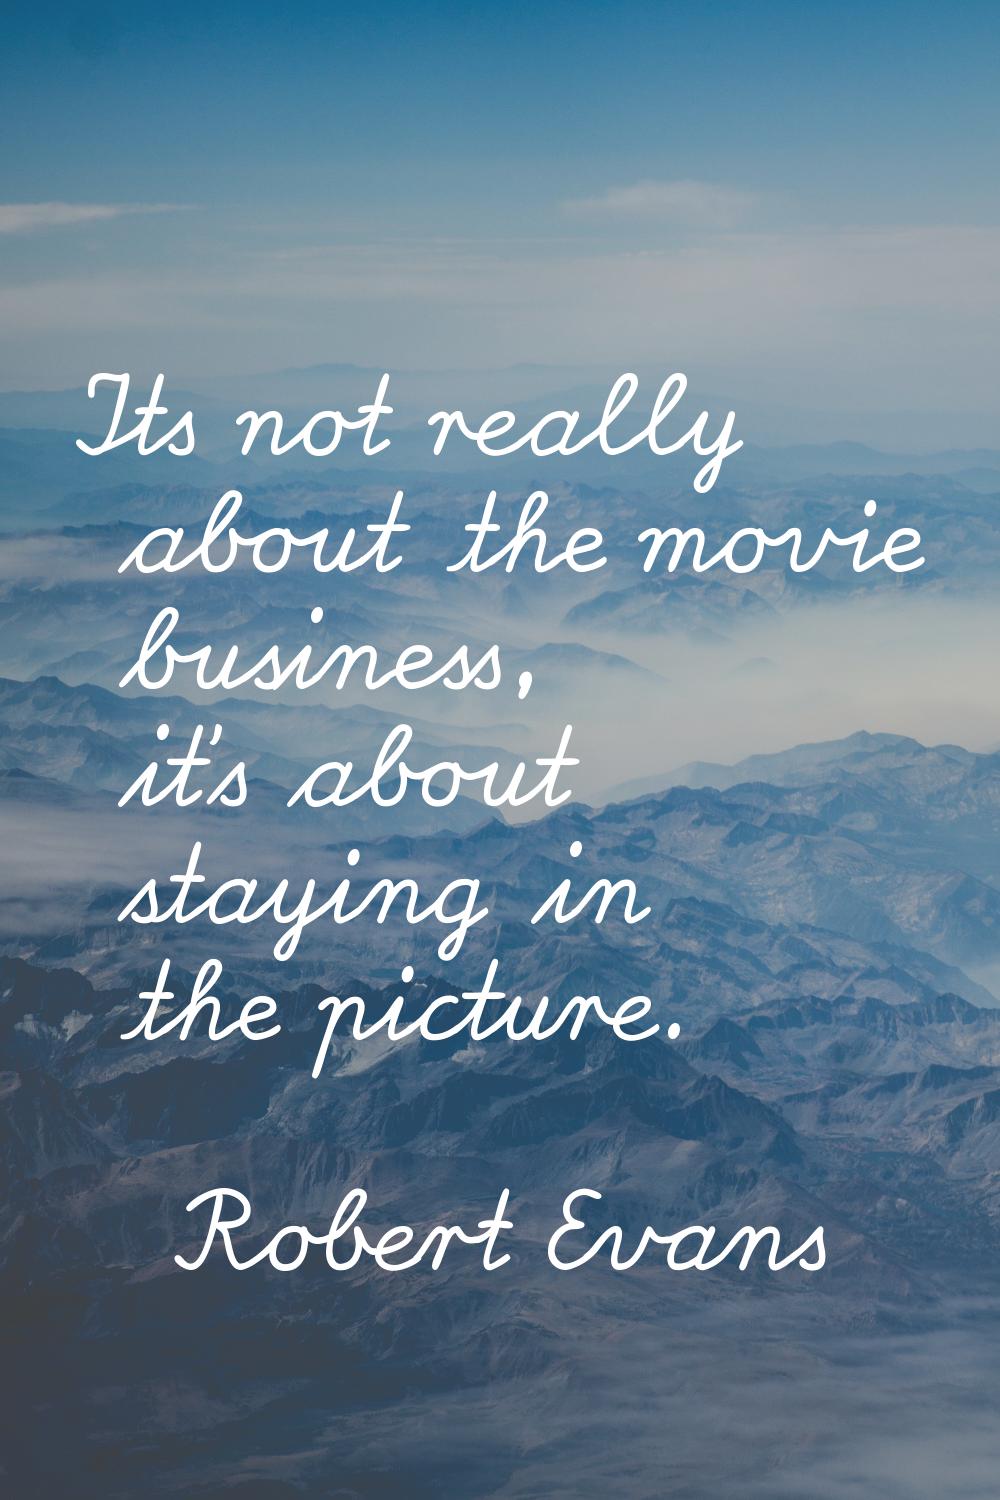 Its not really about the movie business, it's about staying in the picture.